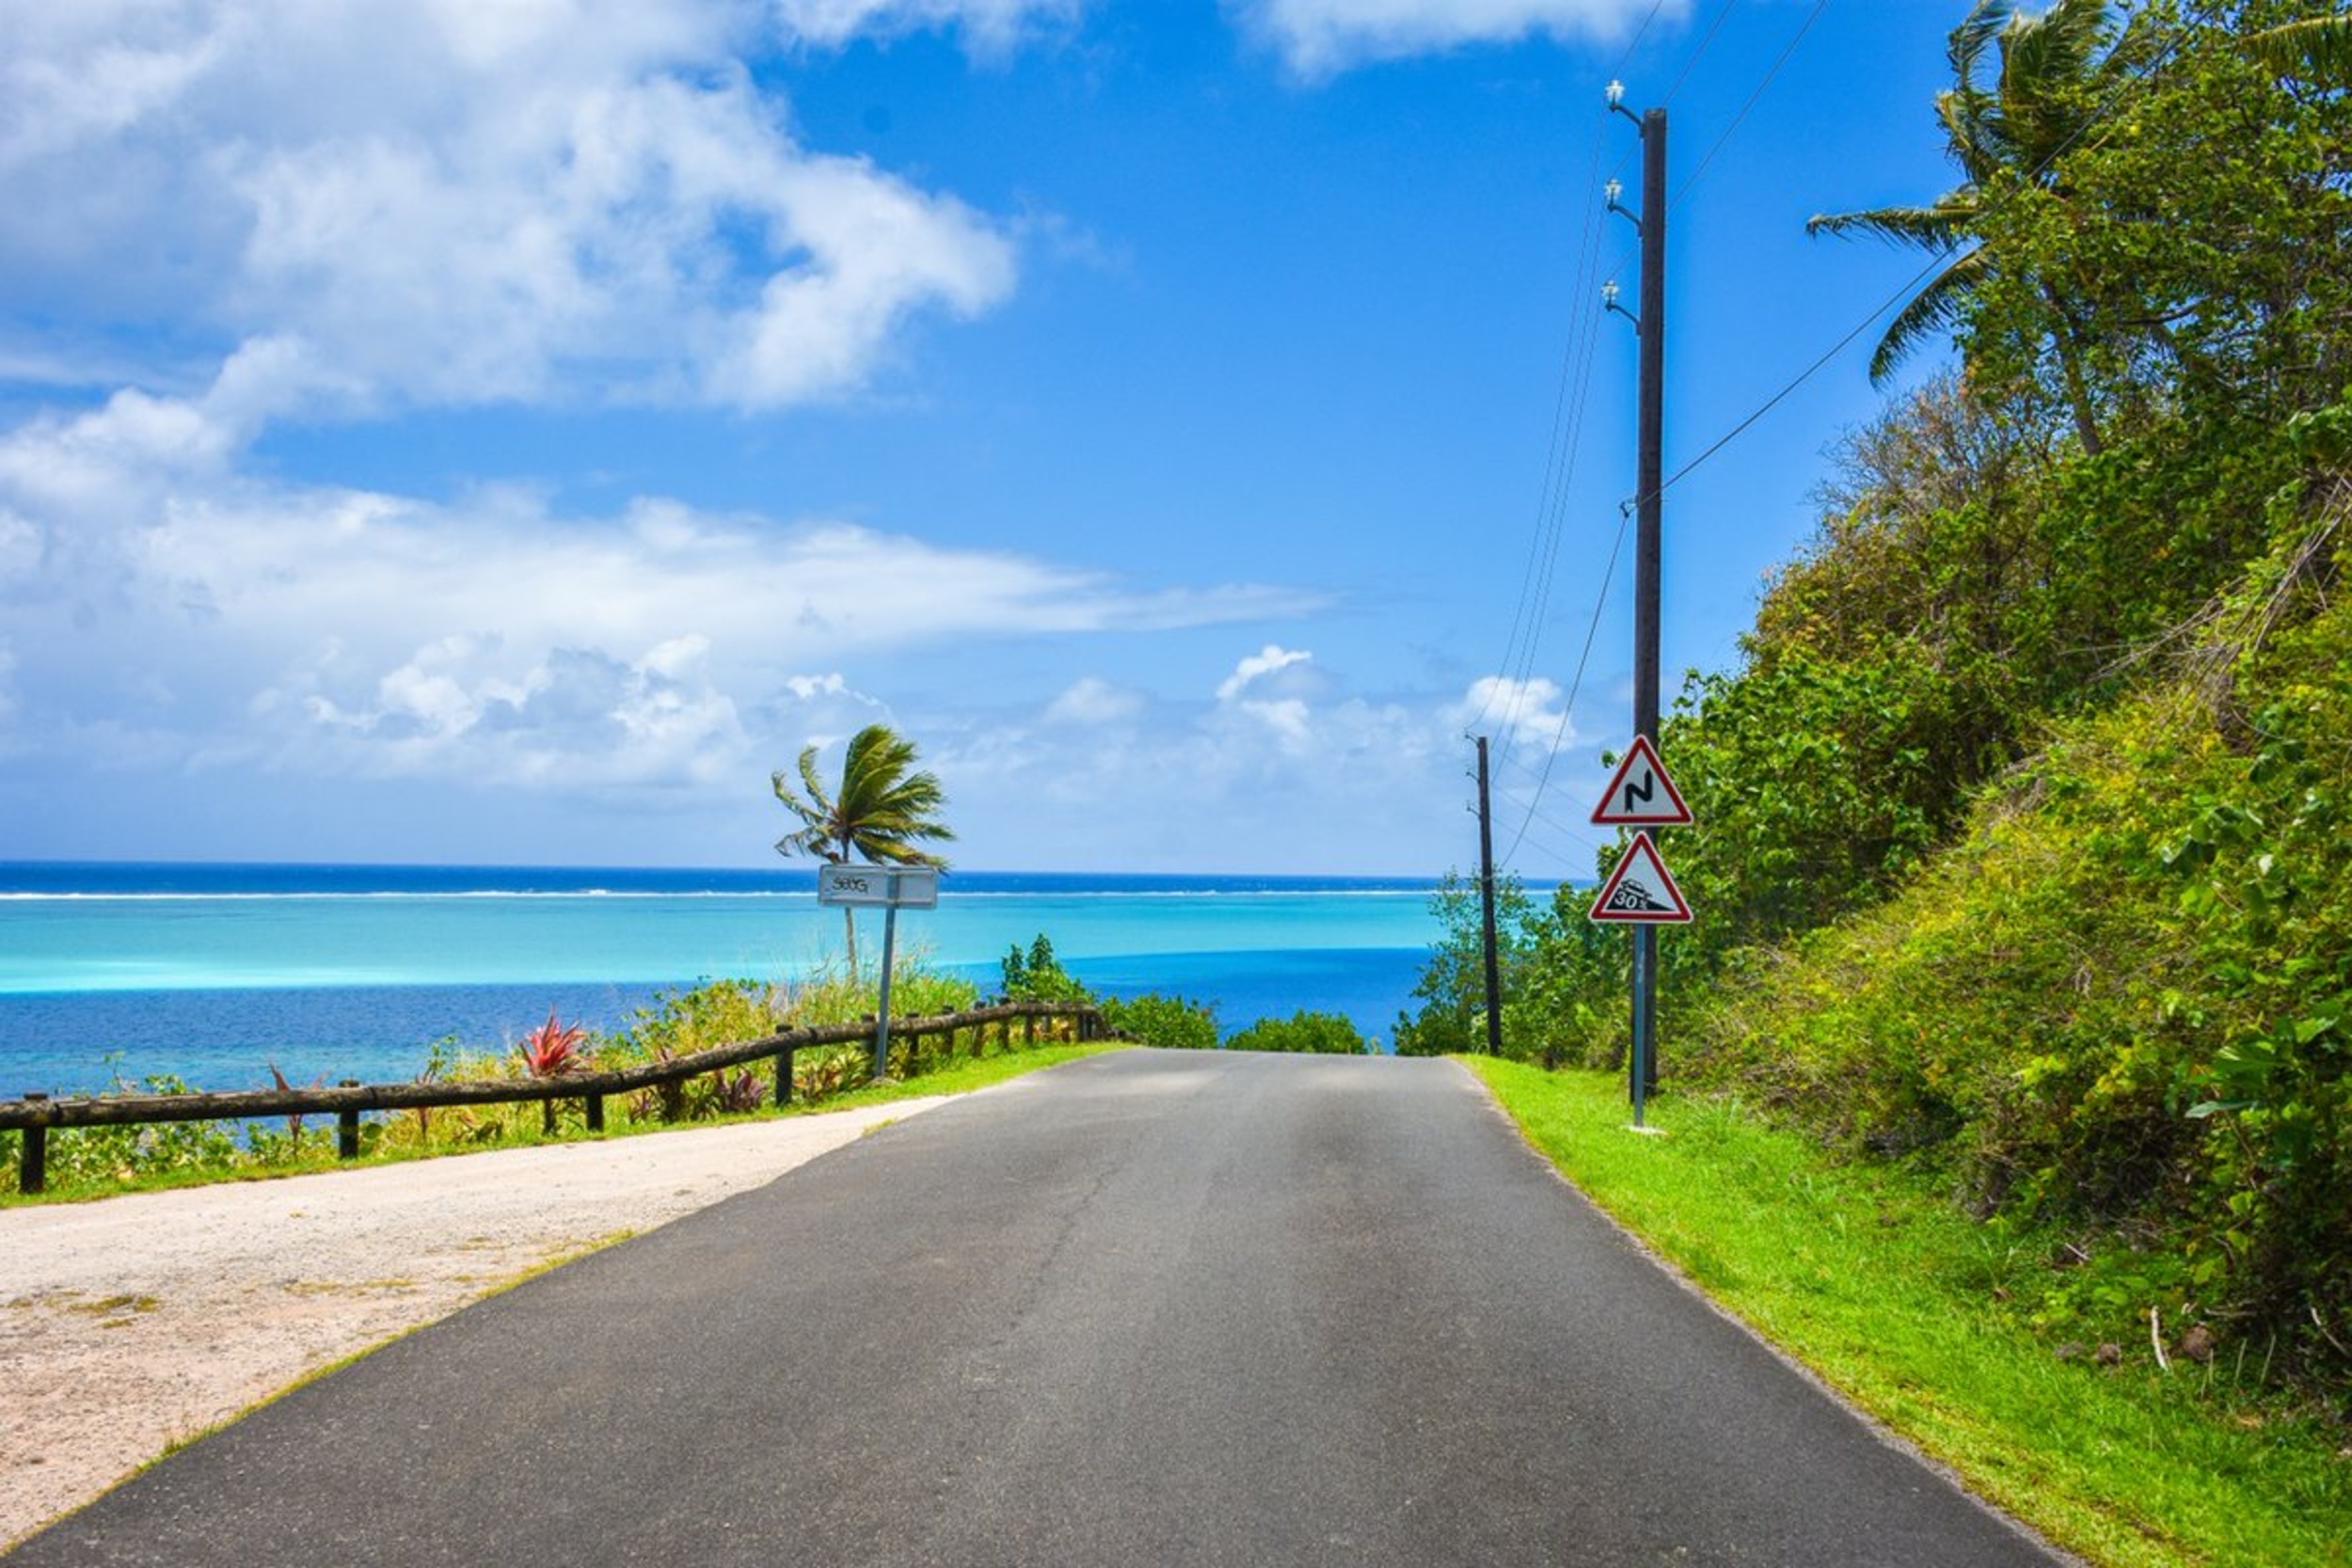 <p>You can drive around the entire island of Tahiti in a day. It's a great way to see the many landscapes, from white sands to black sands, bustling cities to quaint jungles. There's so much to explore on this tropical island.</p><p><a href='https://www.msn.com/en-us/community/channel/vid-cj9pqbr0vn9in2b6ddcd8sfgpfq6x6utp44fssrv6mc2gtybw0us'>Did you enjoy this slideshow? Follow us on MSN to see more of our exclusive lifestyle content.</a></p>